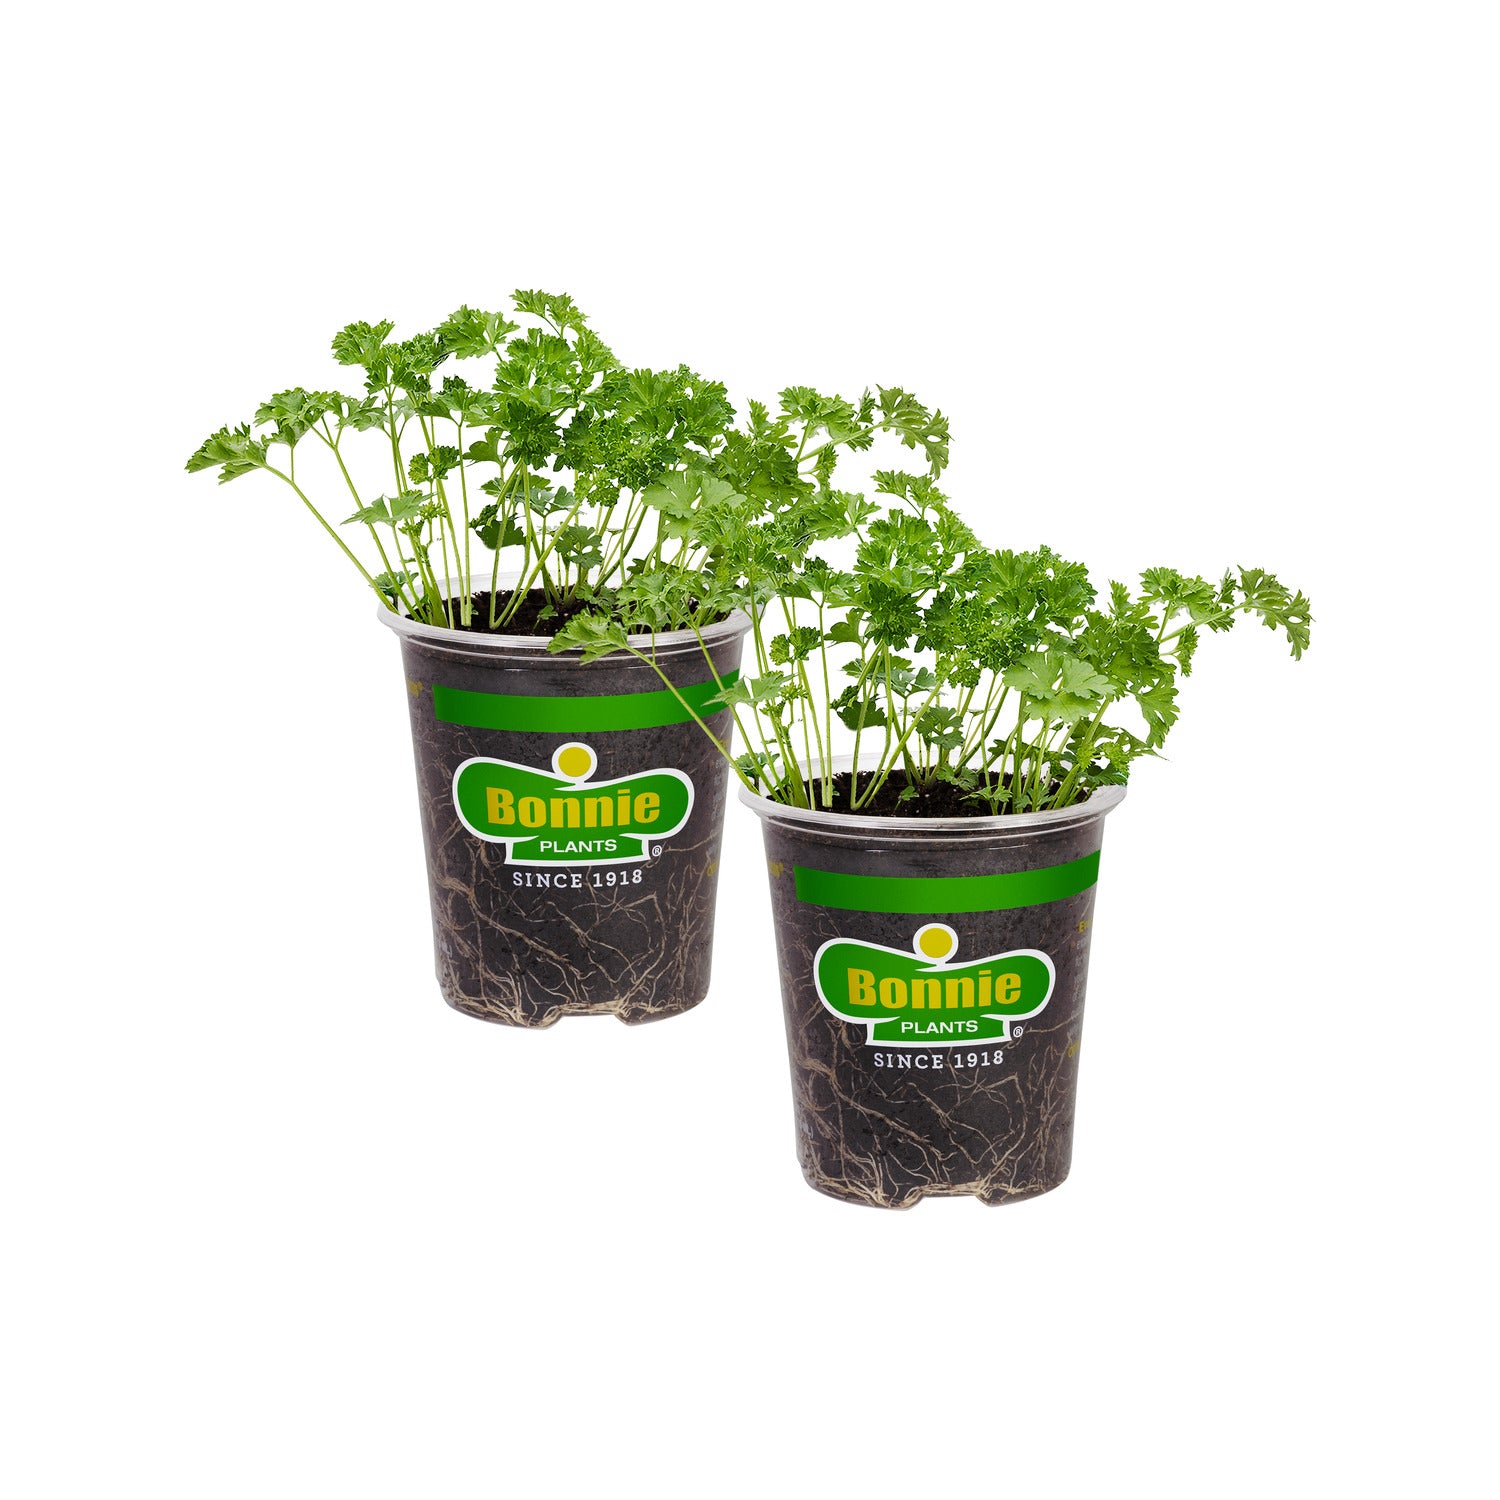 Curled Parsley (2 Pack)